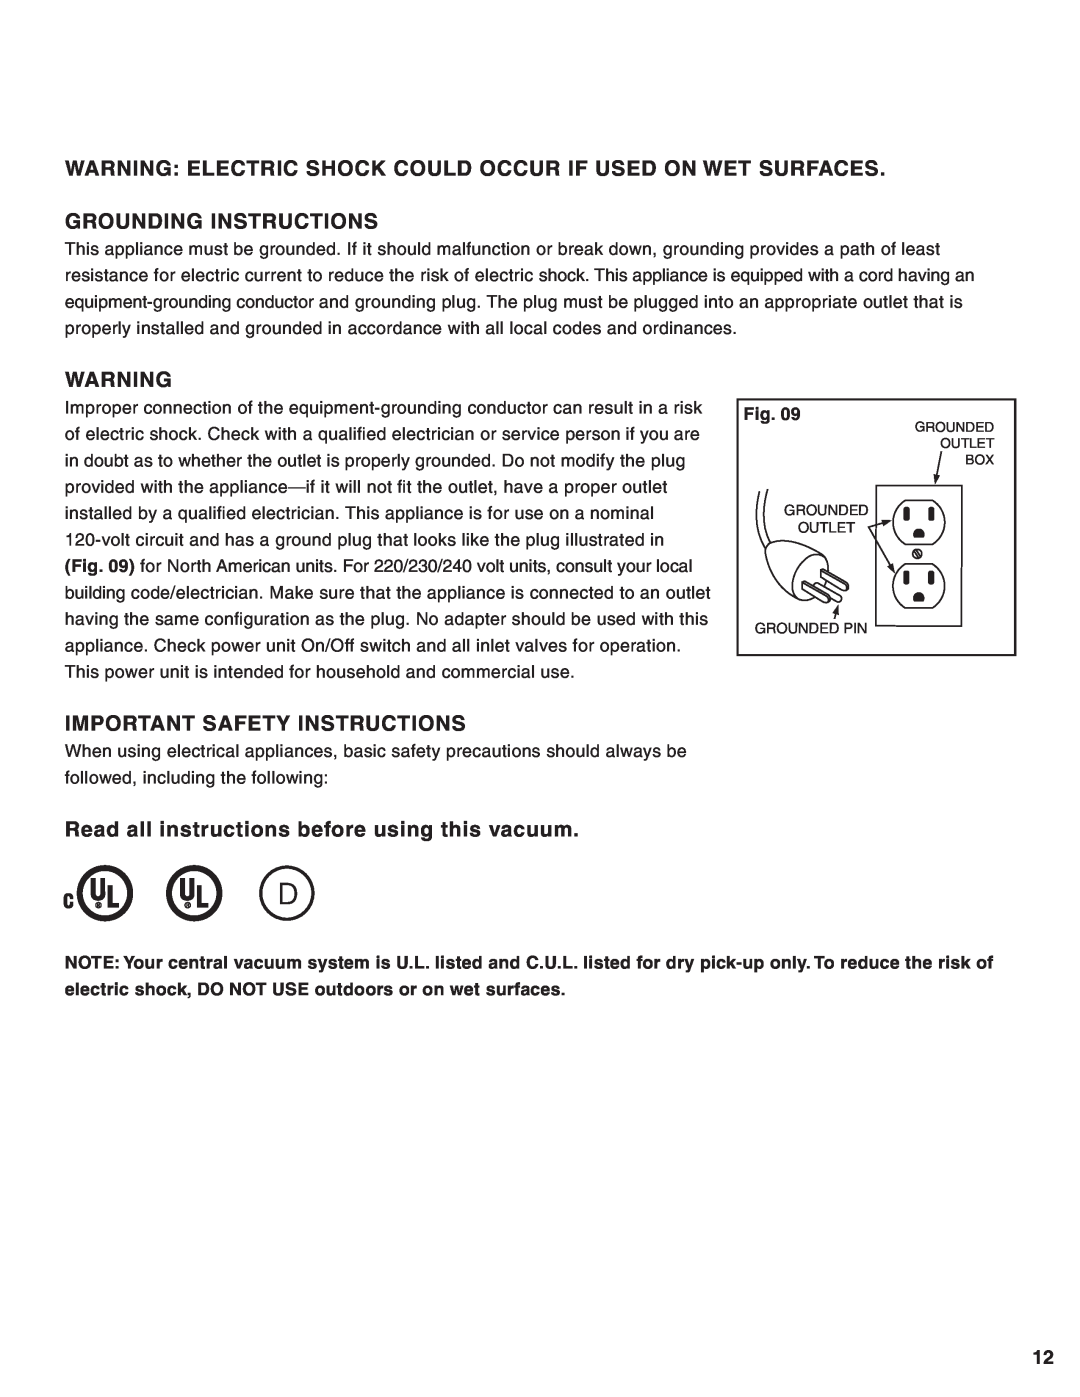 Eureka Central Vacuum Cleaner manual Warning Electric Shock Could Occur If Used On Wet Surfaces, Grounding Instructions 